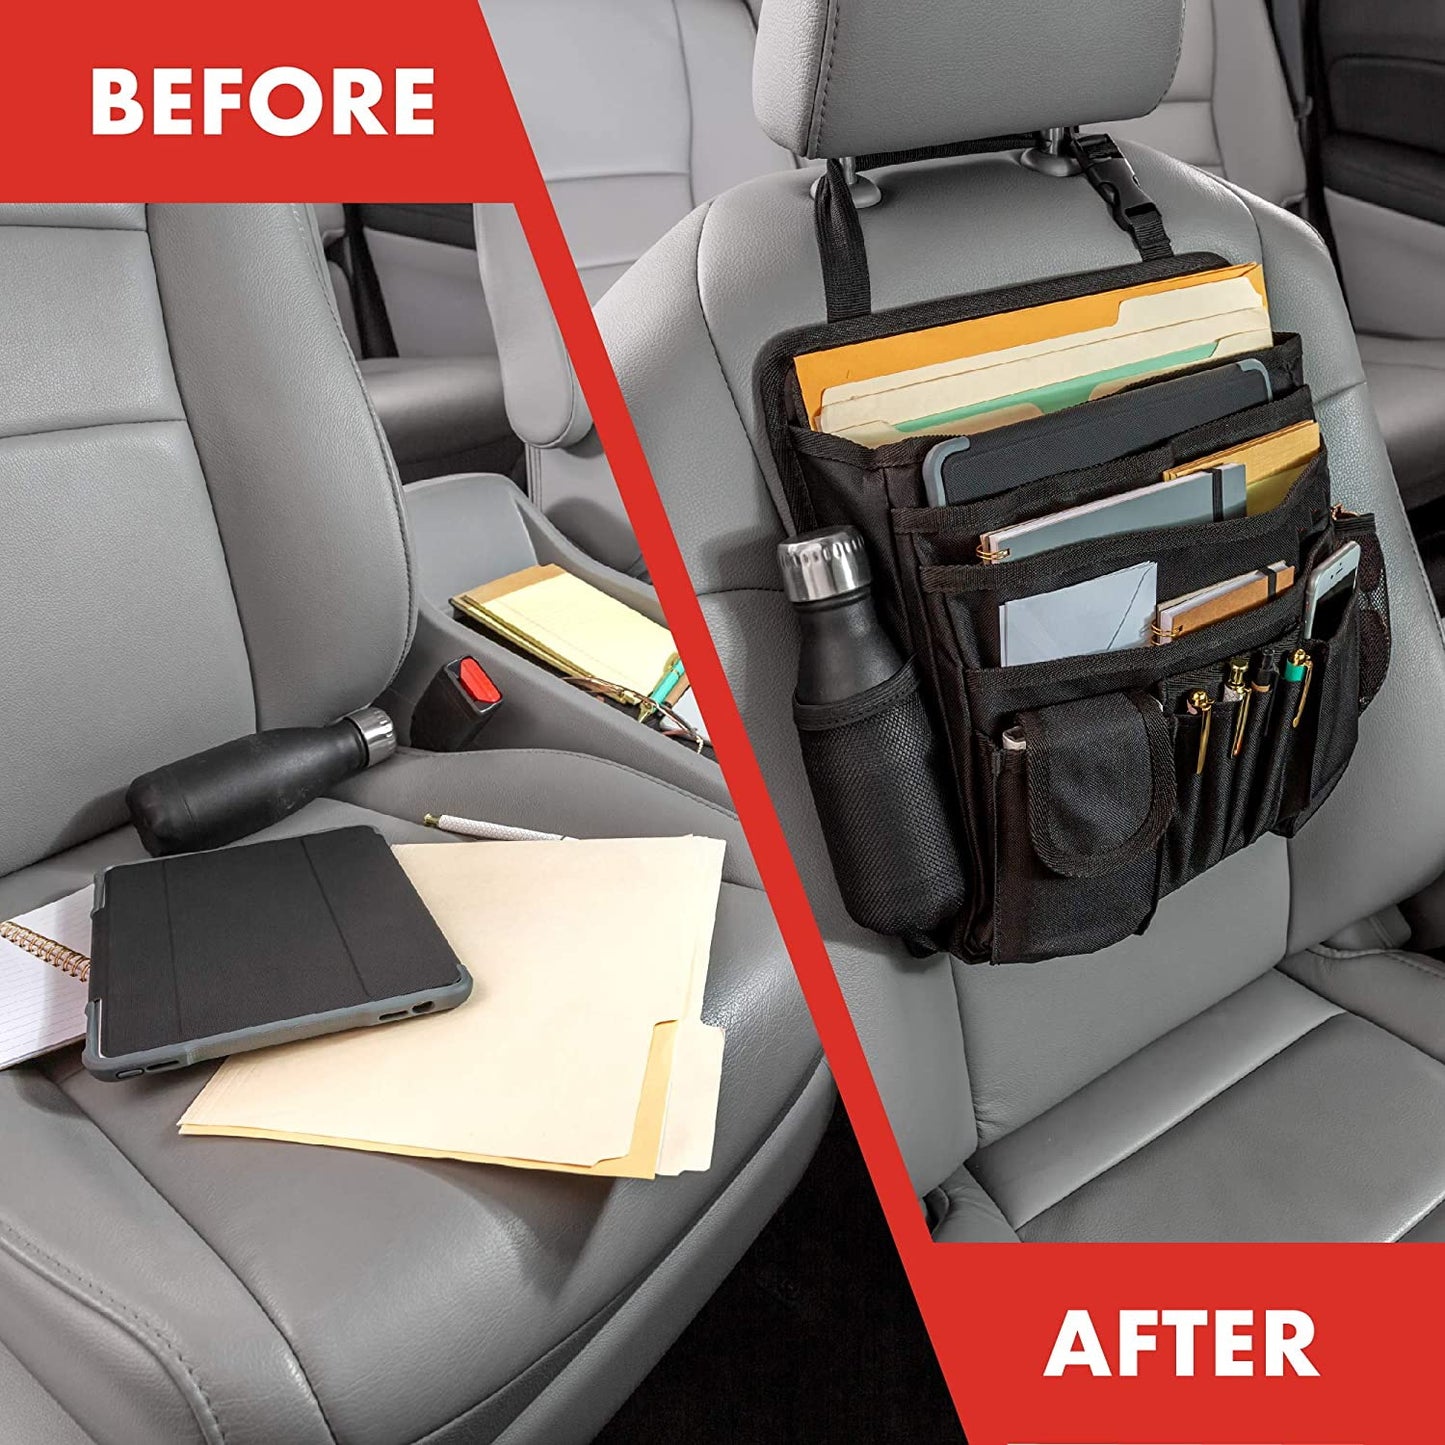 Durable Car Organizer for Front Seat or Car Seat